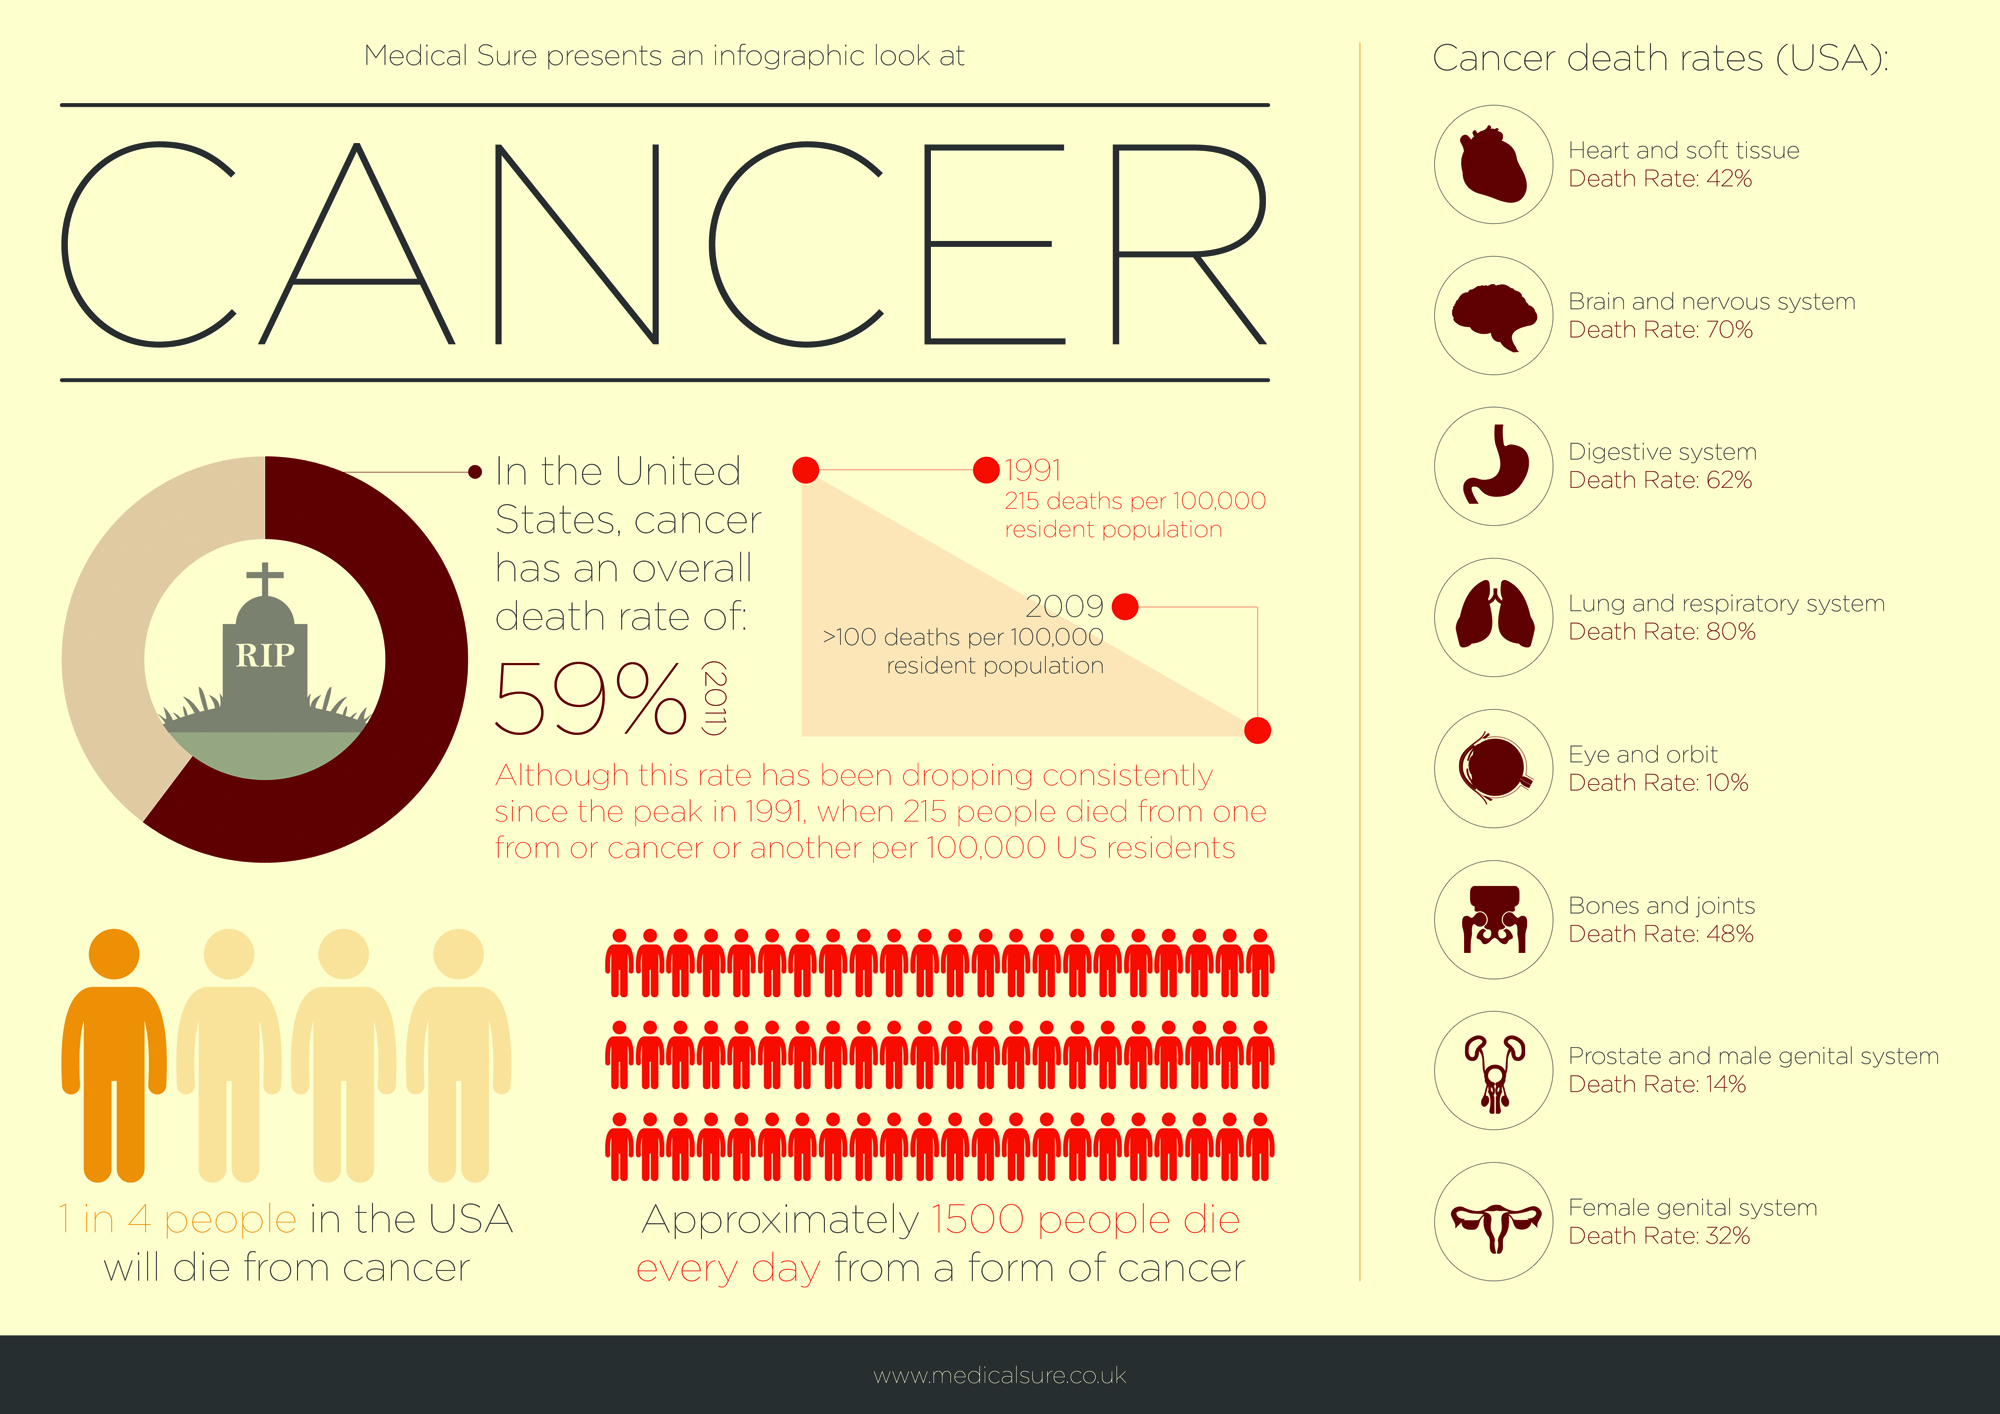 cancer encyclopedia|cancer cancer: past and present of cancer